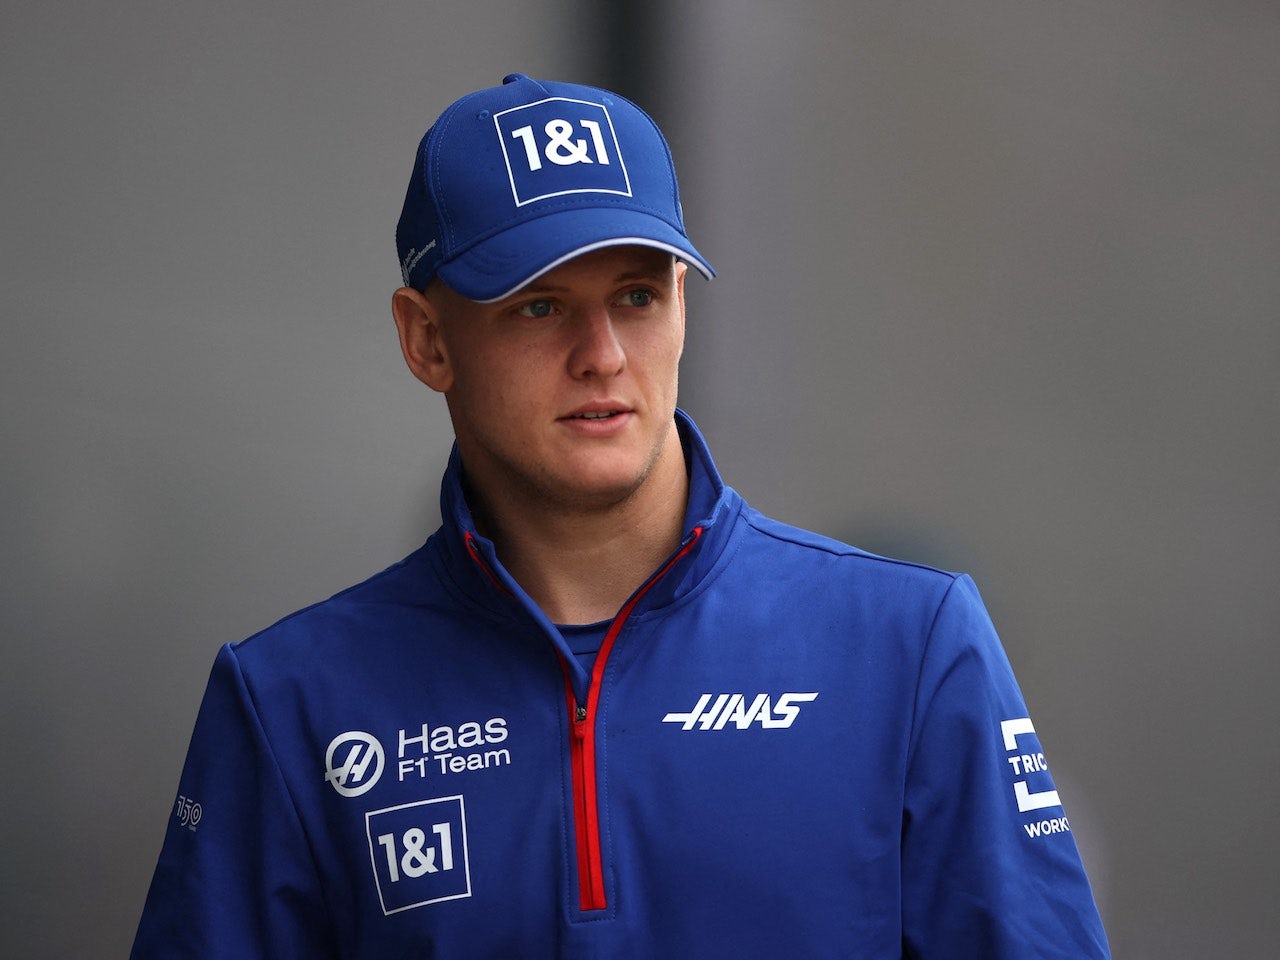 Mick Schumacher unwell for father's award tribute